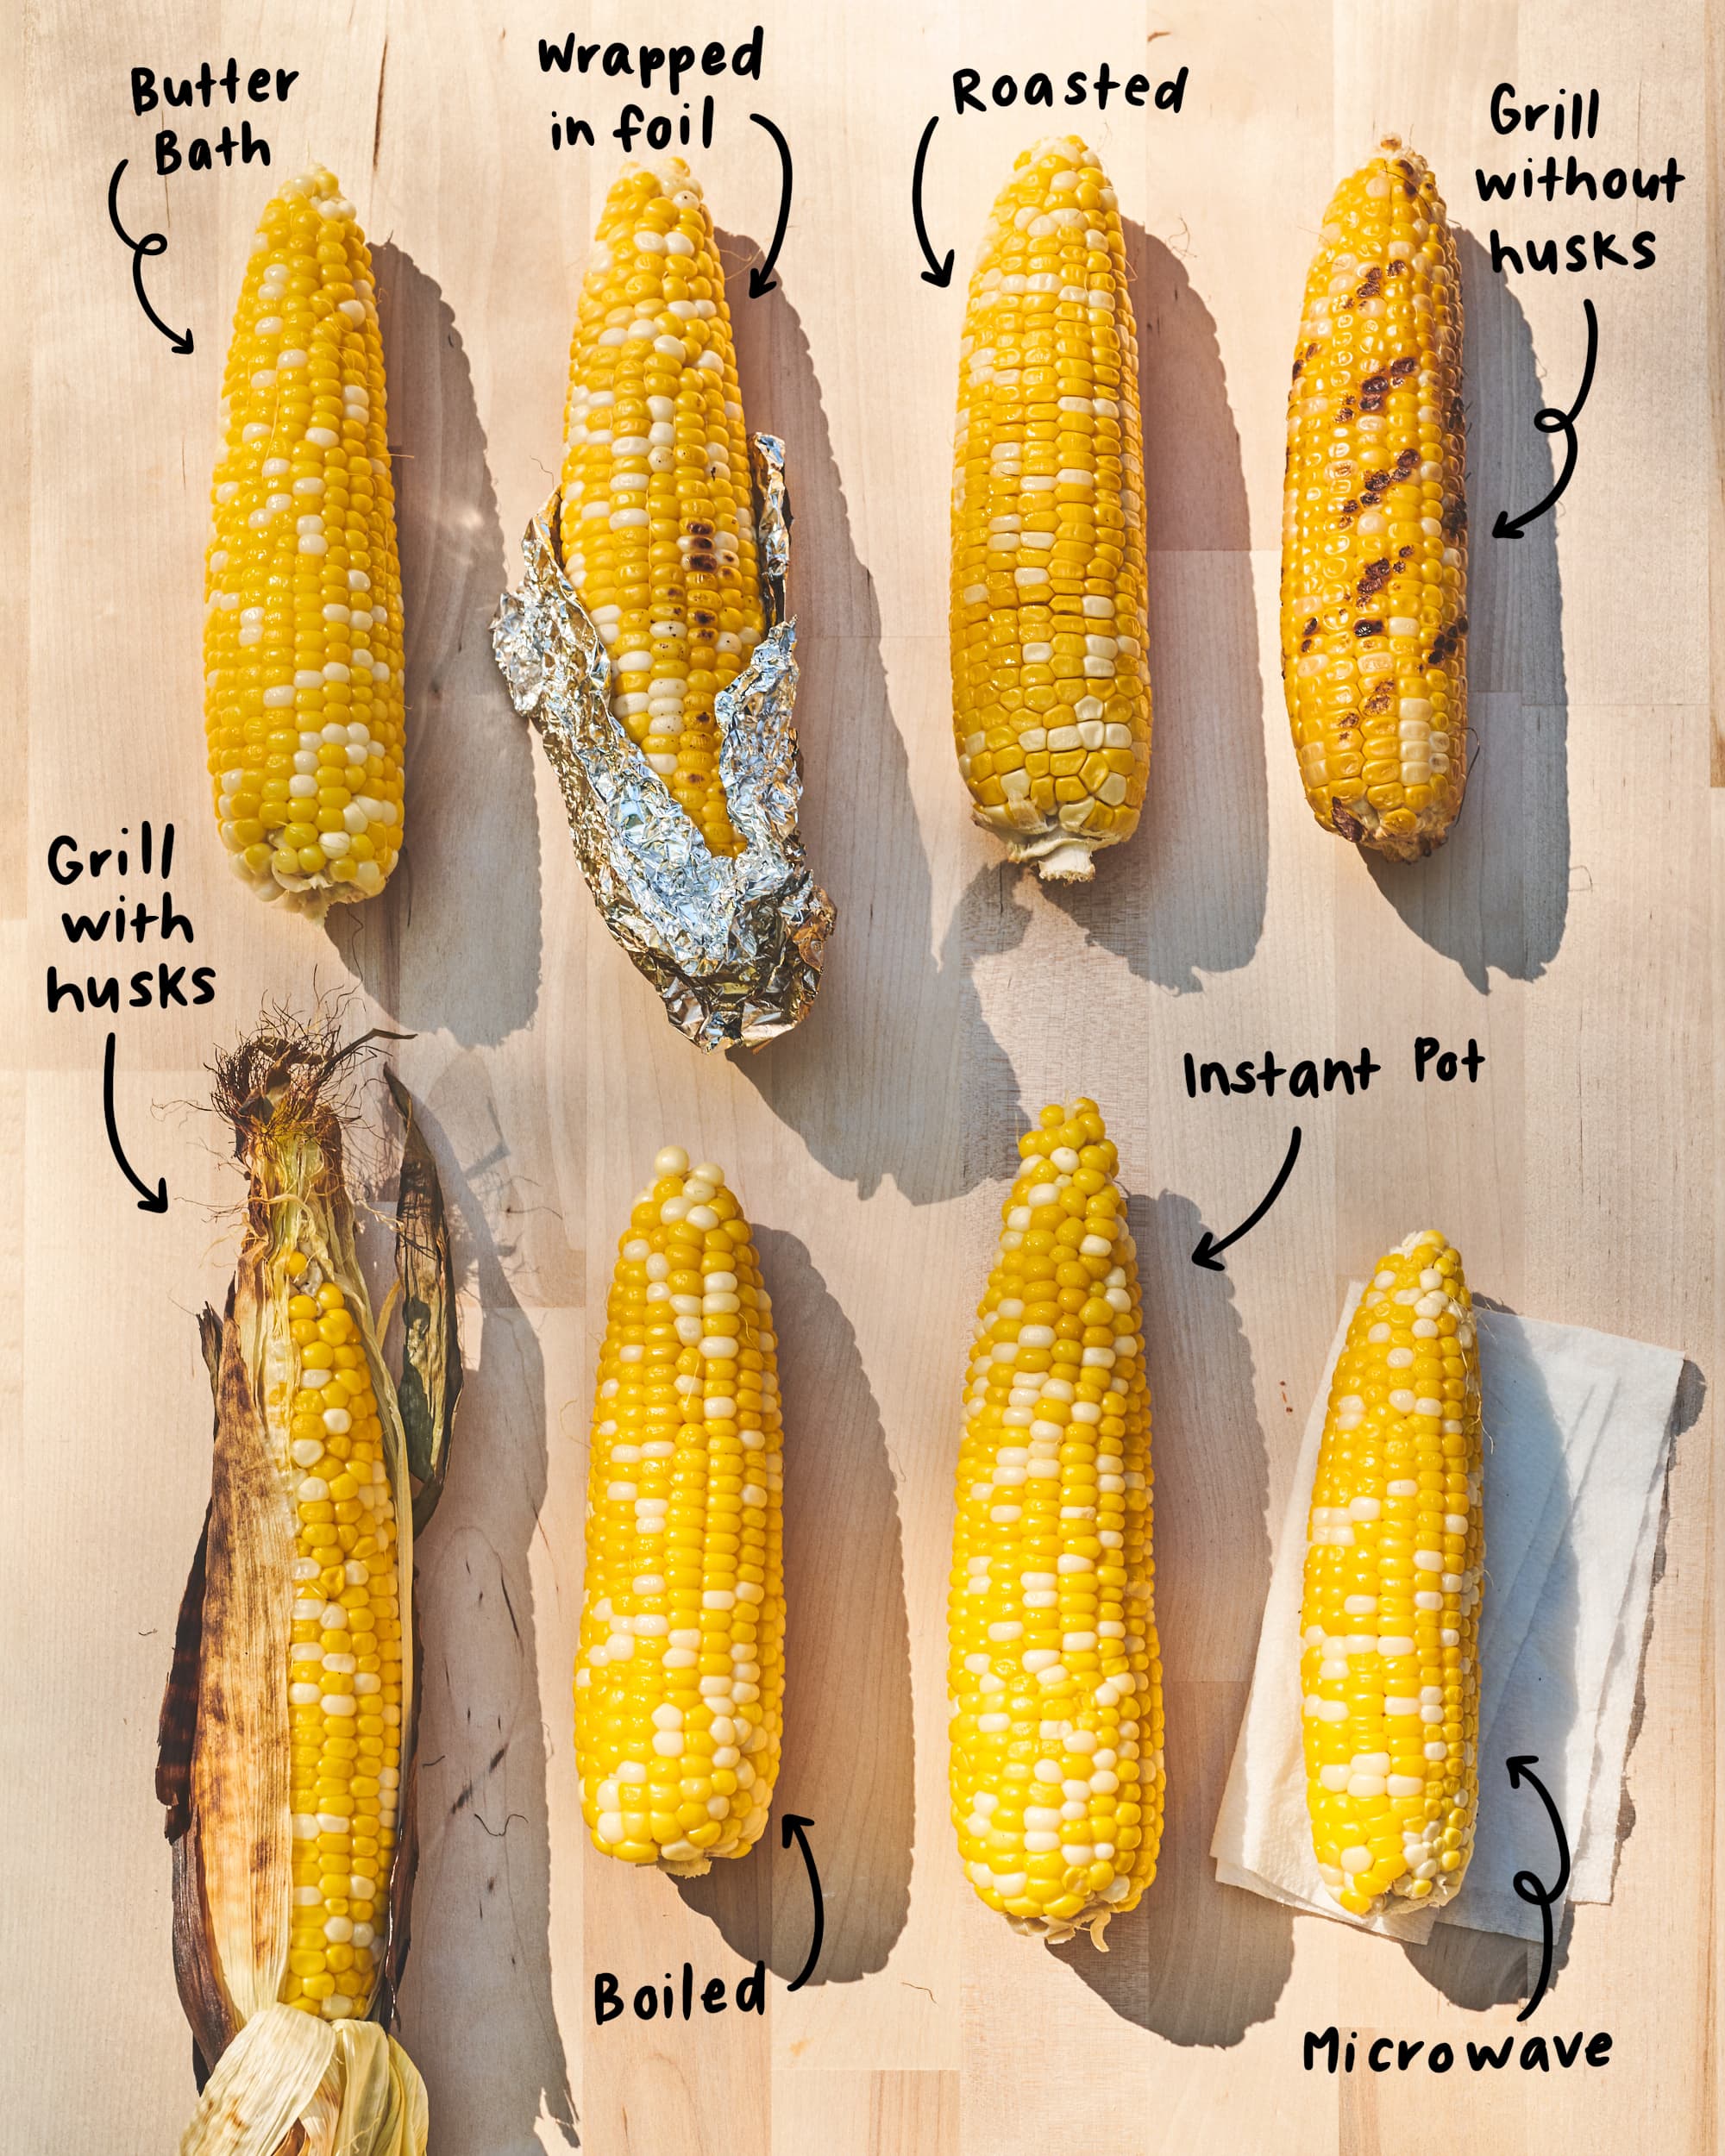 We Tried 8 Methods For Cooking Corn On The Cob And Found A Clear Winner Kitchn,Spoons Game Rules